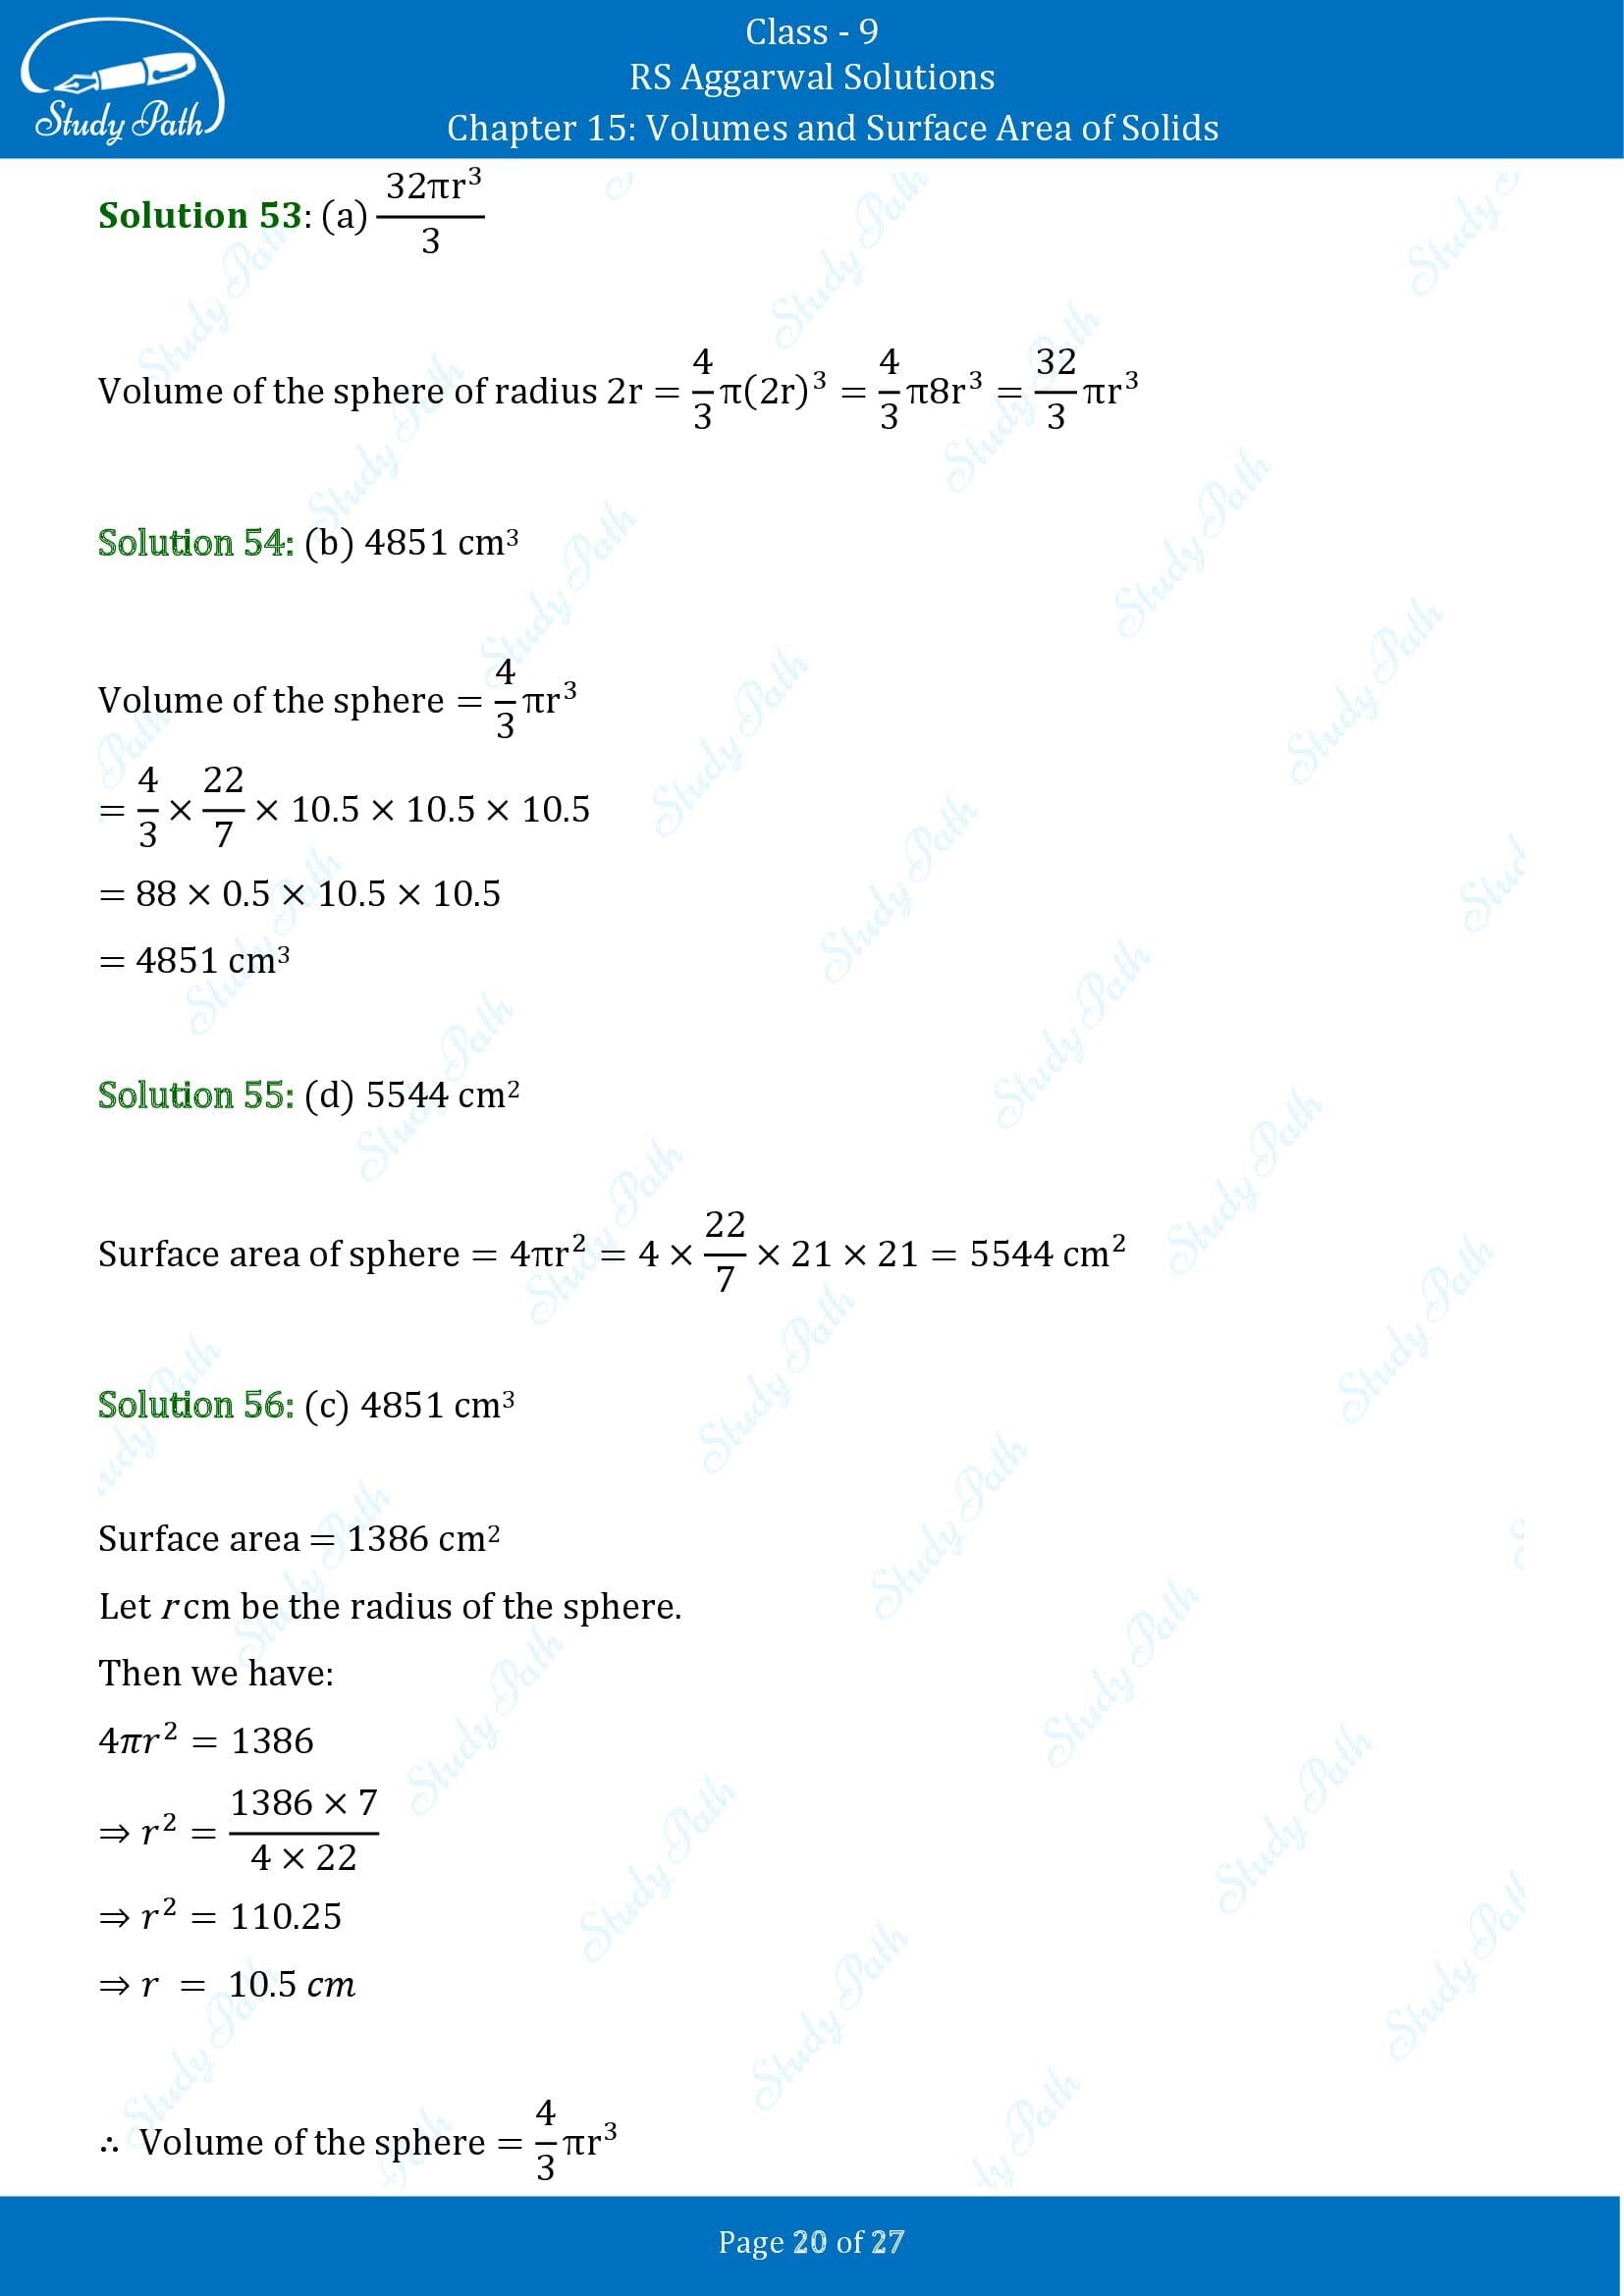 RS Aggarwal Solutions Class 9 Chapter 15 Volumes and Surface Area of Solids Multiple Choice Questions MCQs 00020